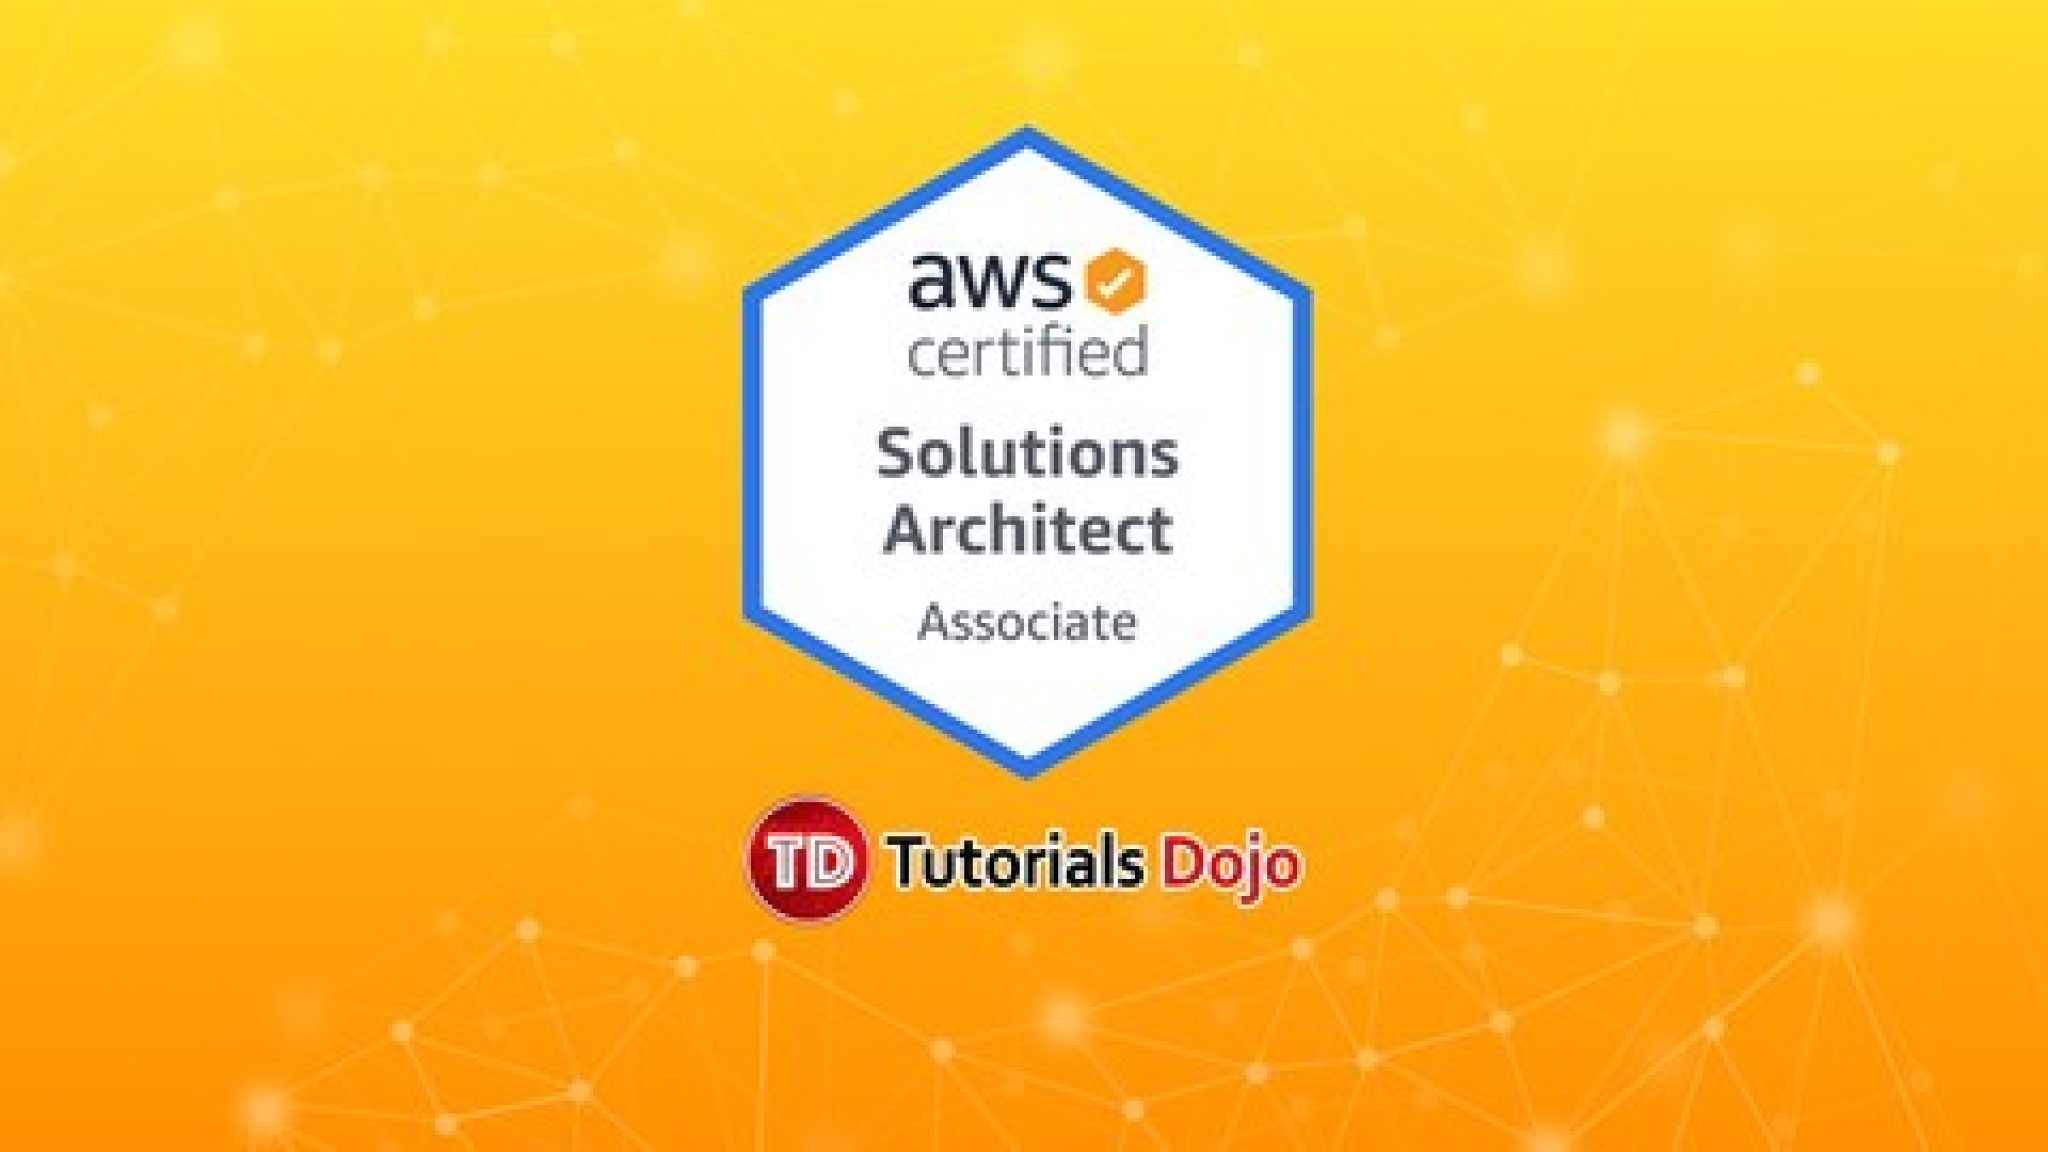 interview questions on aws solution architect associate